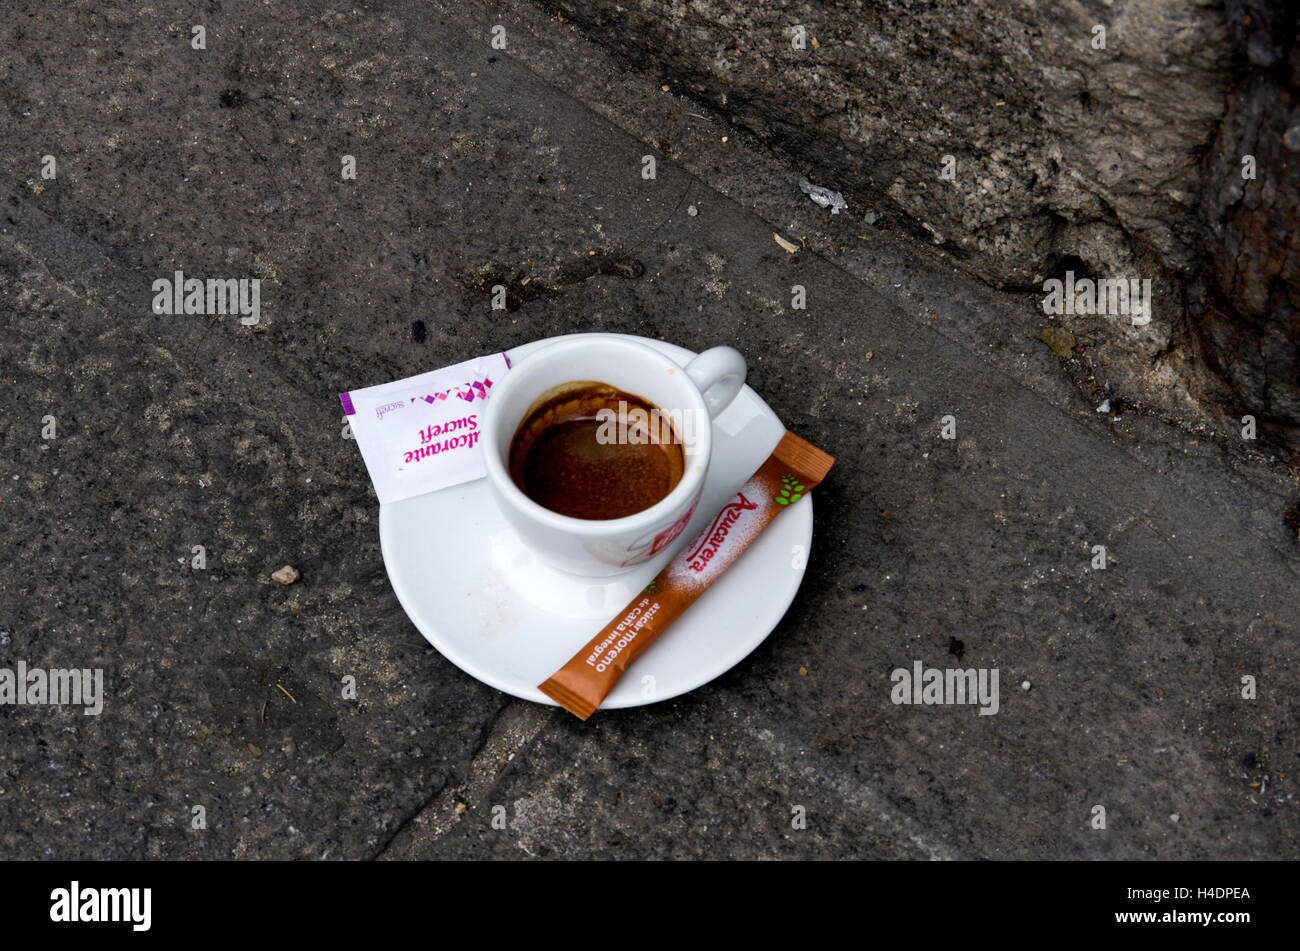 Partially finished cup of espresso is left on pavement by edge of stone wall. Two unopened packets of sugar on the saucer. Stock Photo